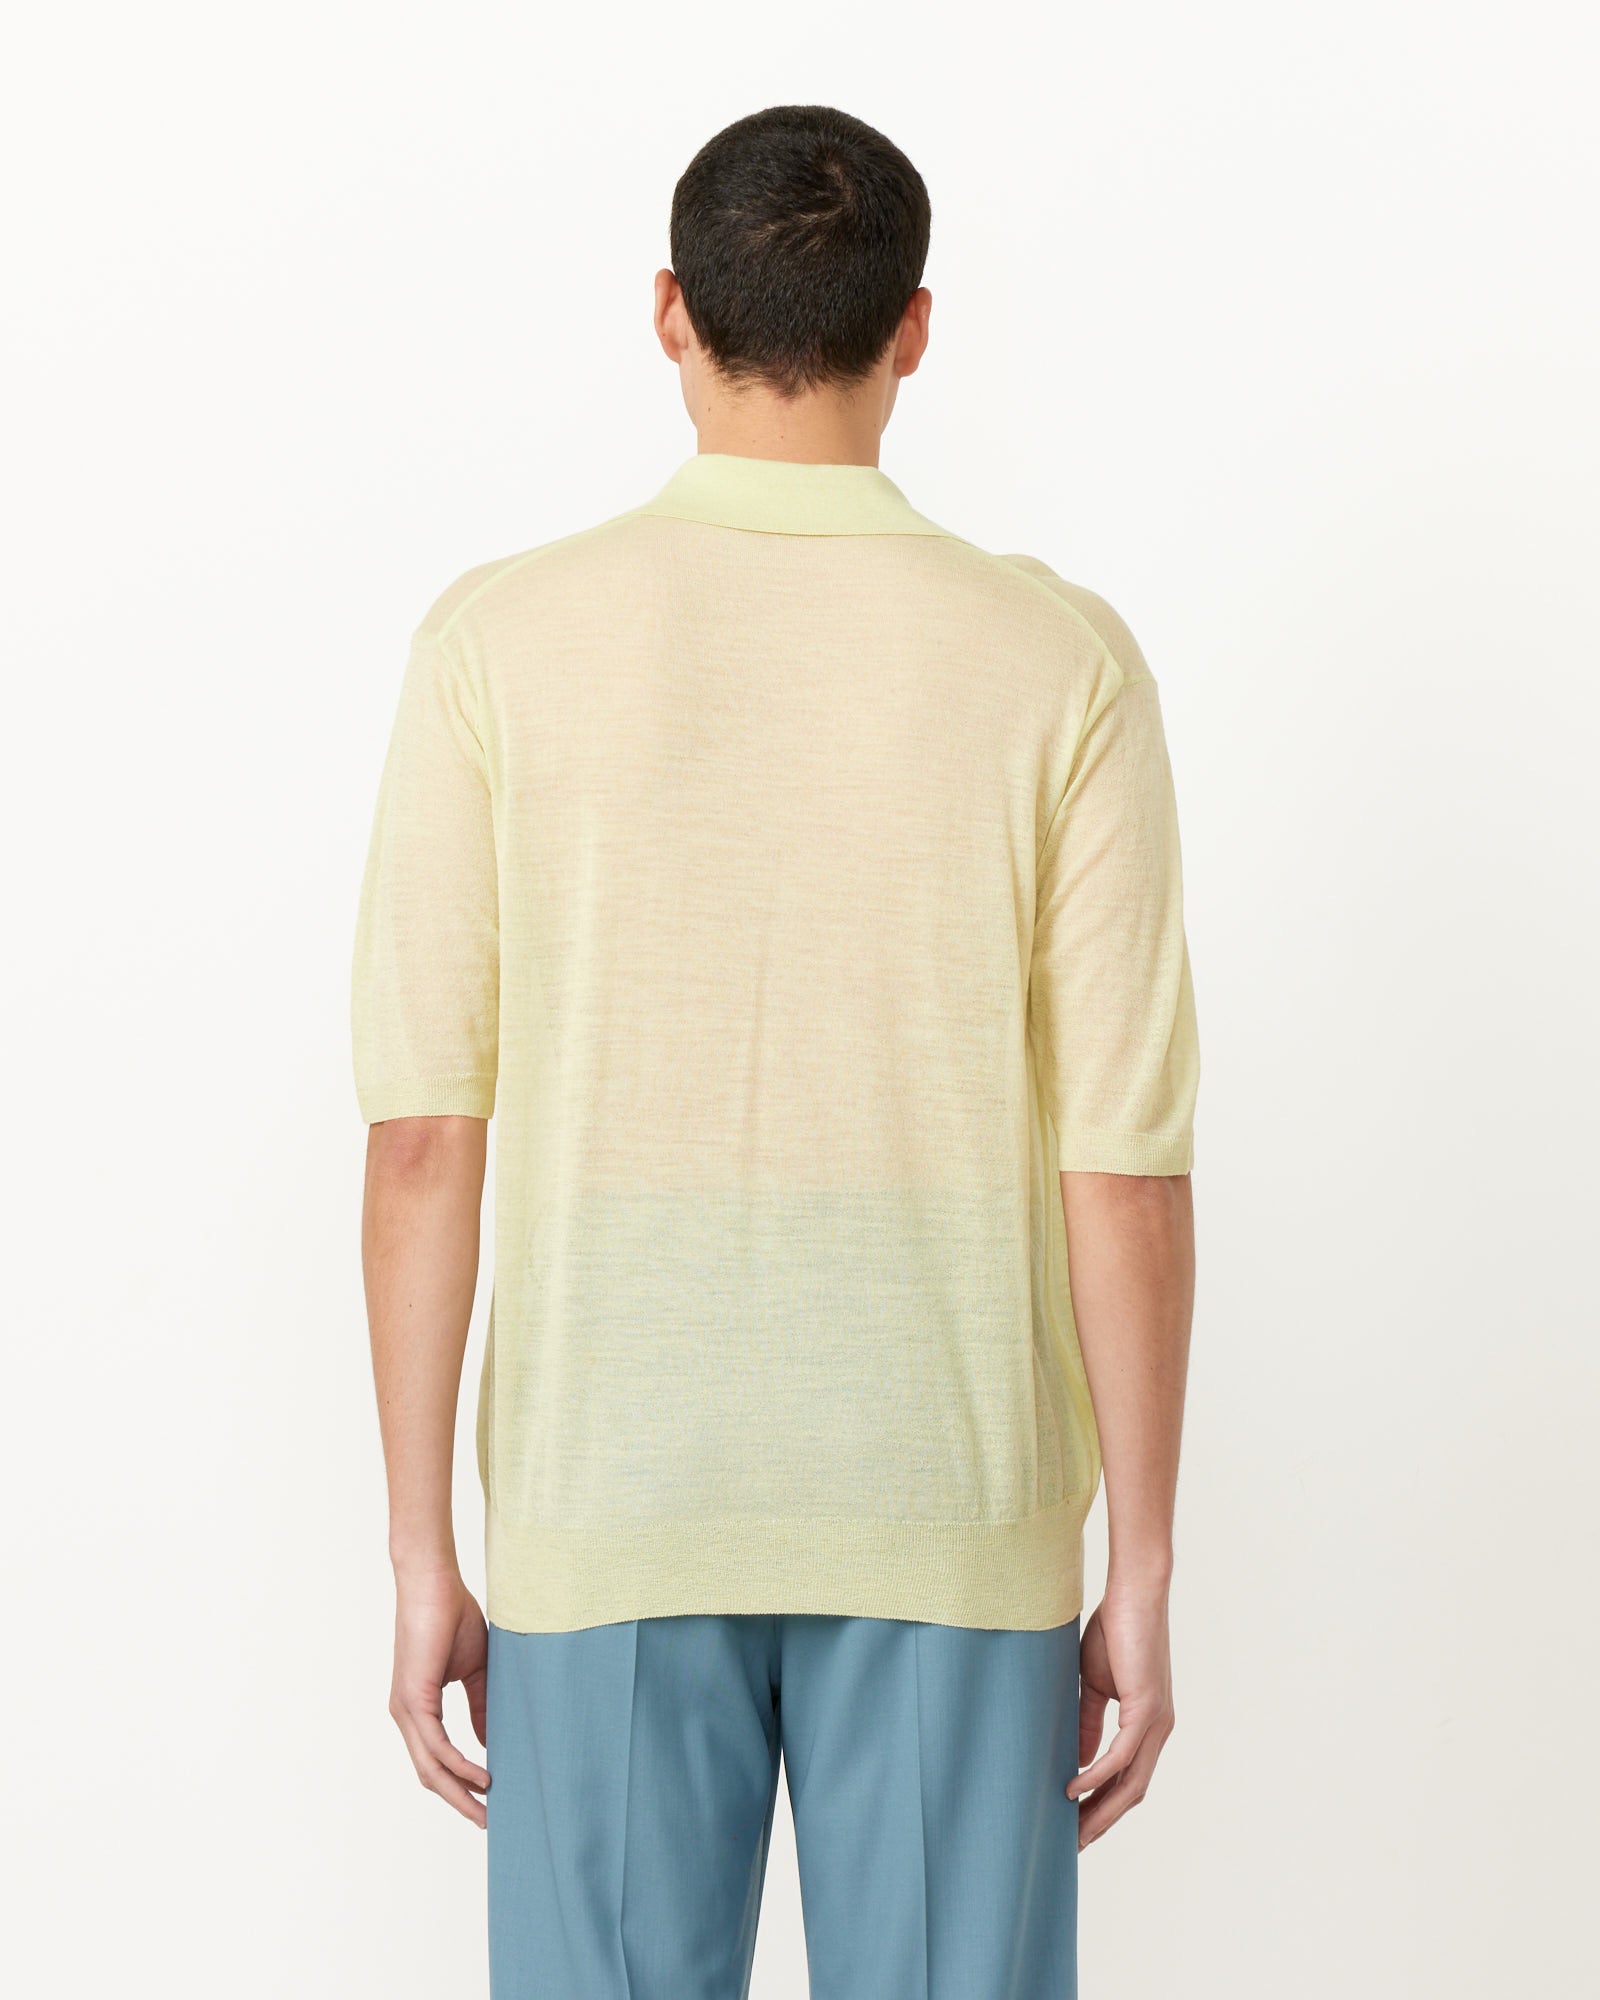 Silk Knit Skipper Polo in Lime Yellow